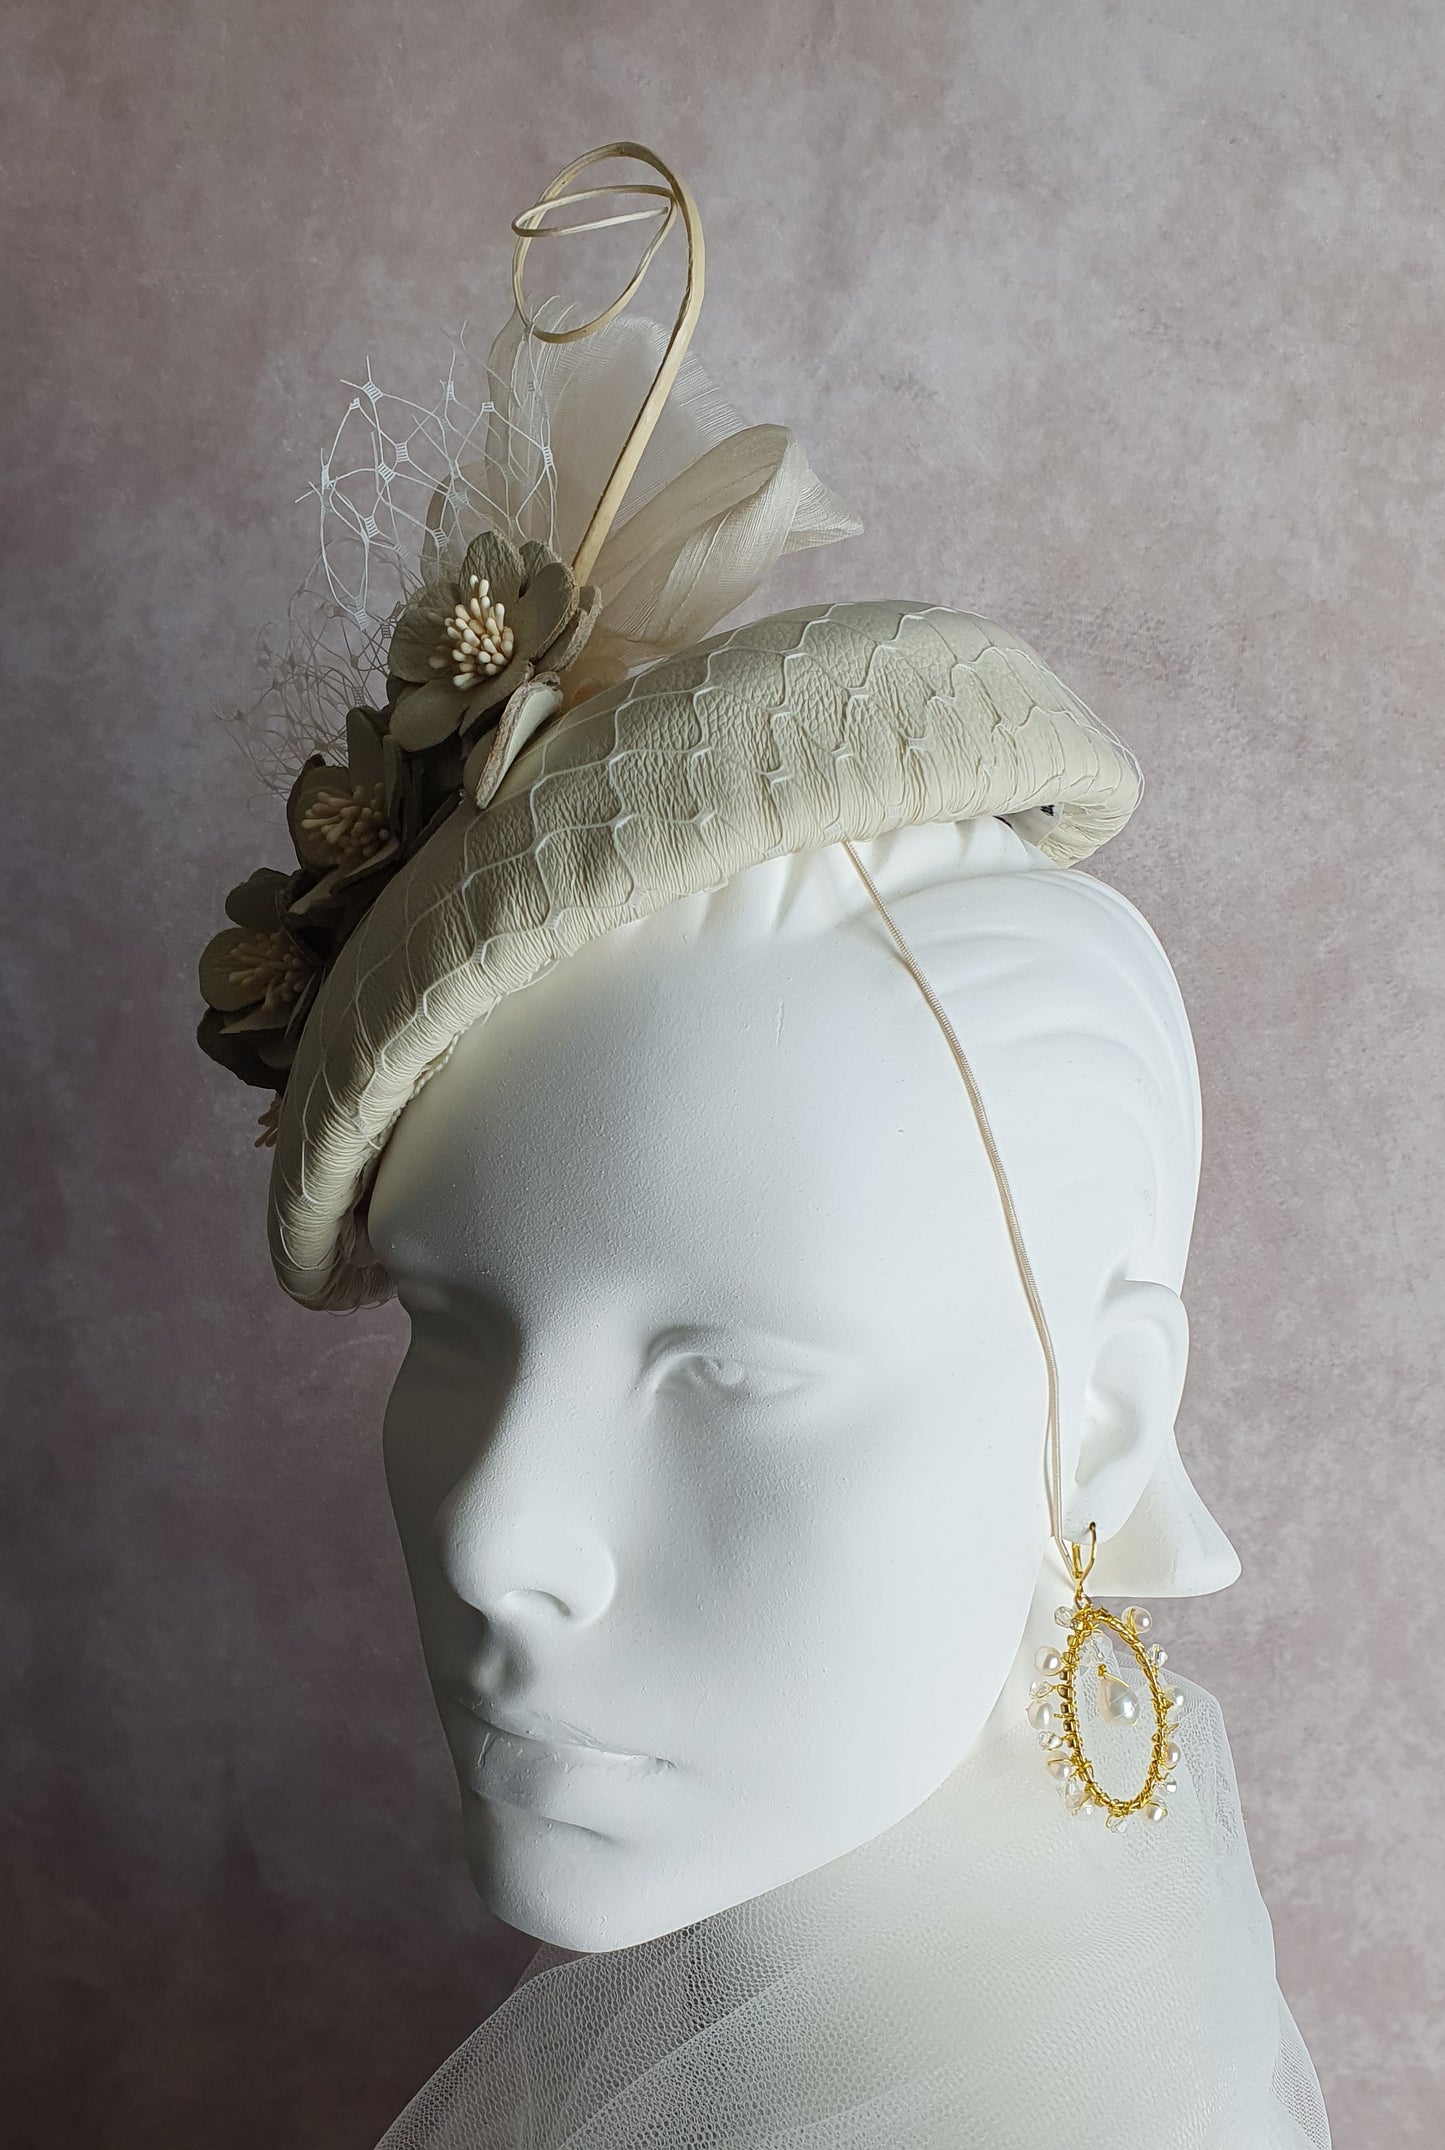 Handmade fascinator beige with ostrich with abaca silk and natural leather, elegant women's wedding hat for special occasion